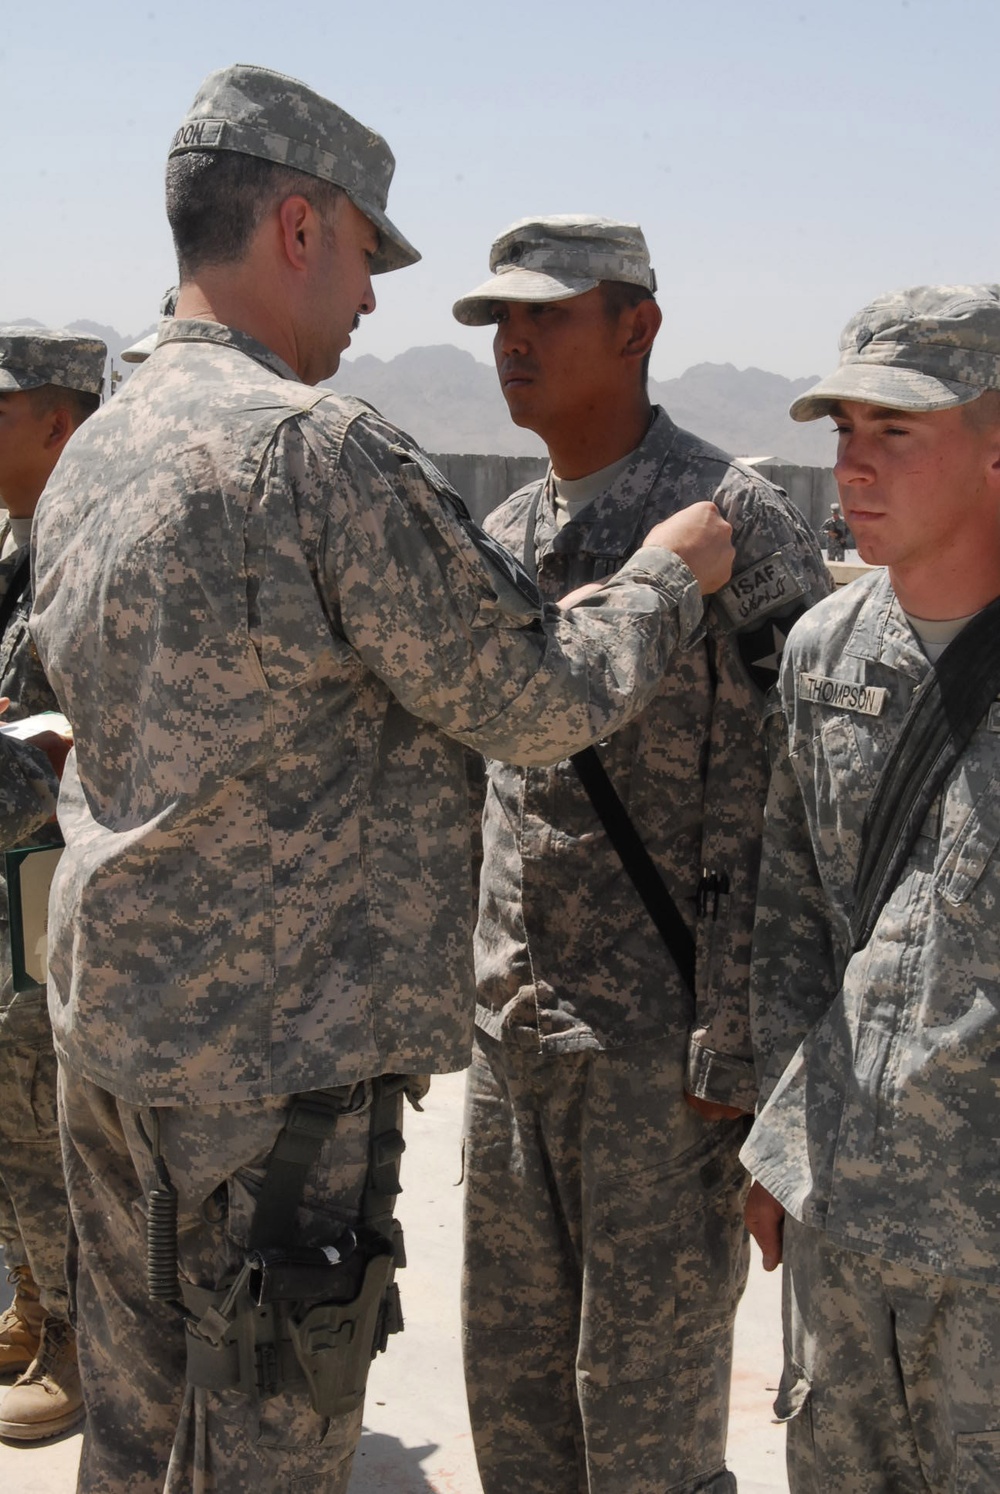 Soldiers Receive Recognition for Work in Afghanistan